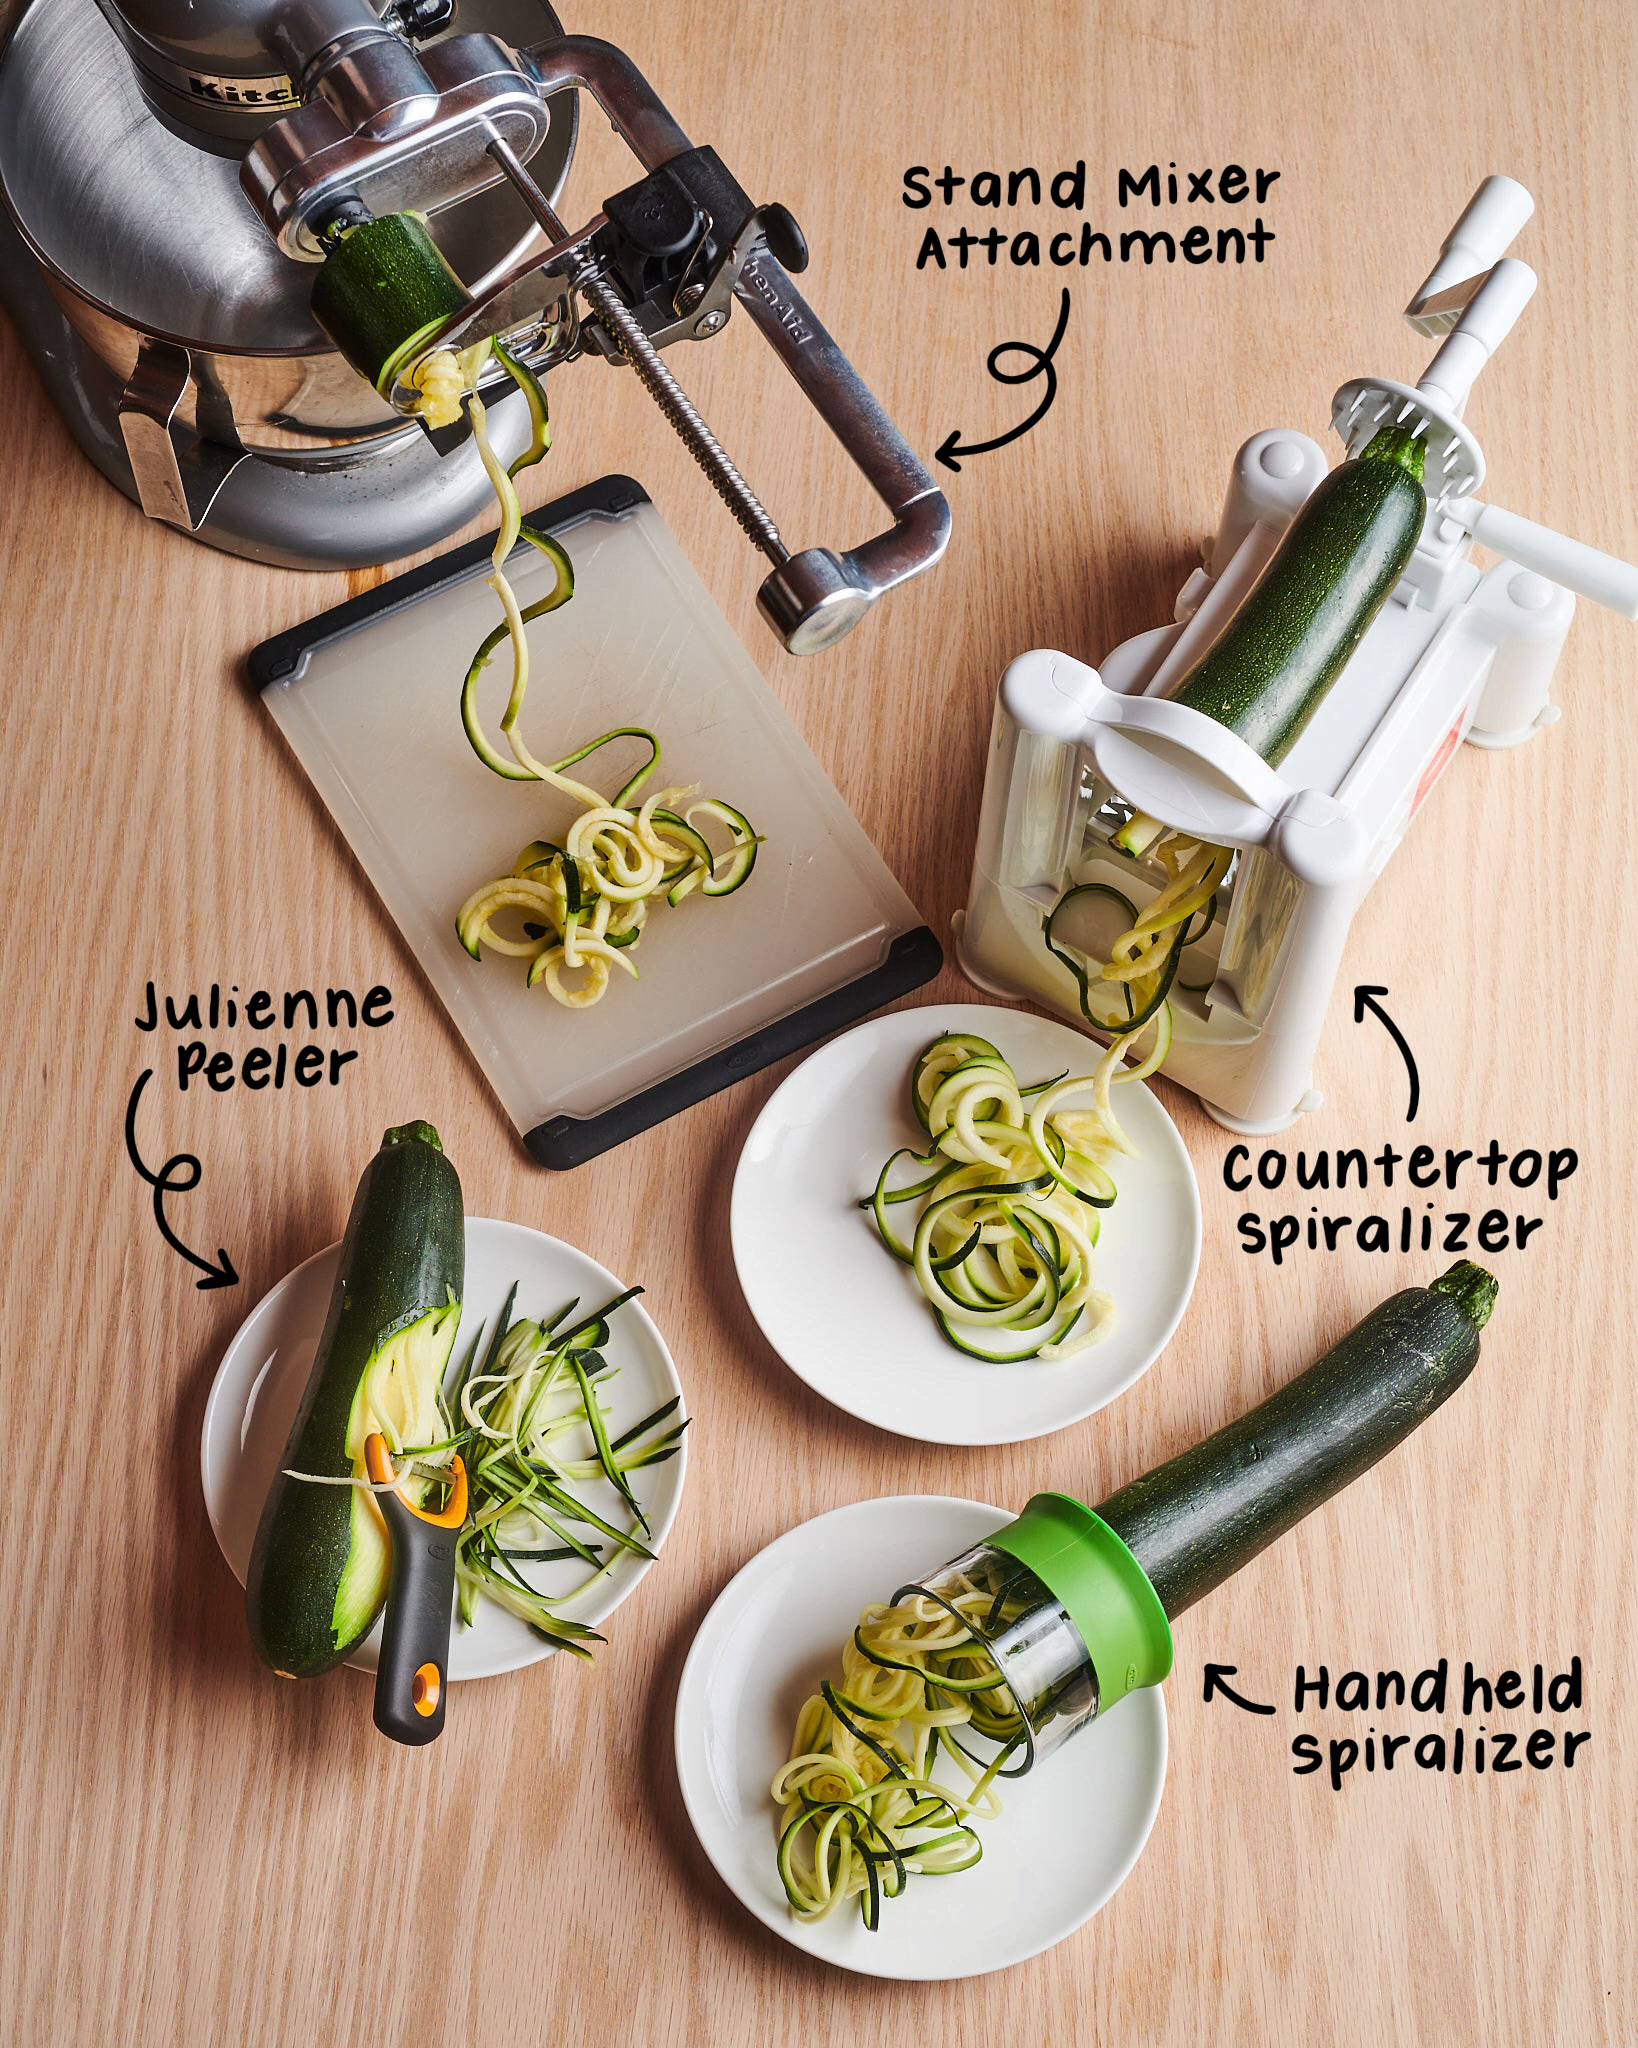 https://cdn.apartmenttherapy.info/image/upload/v1624385910/k/Photo/Series/2021-05-tools-showdown-zoodles/tools-showdown-zoodles-inpost.png